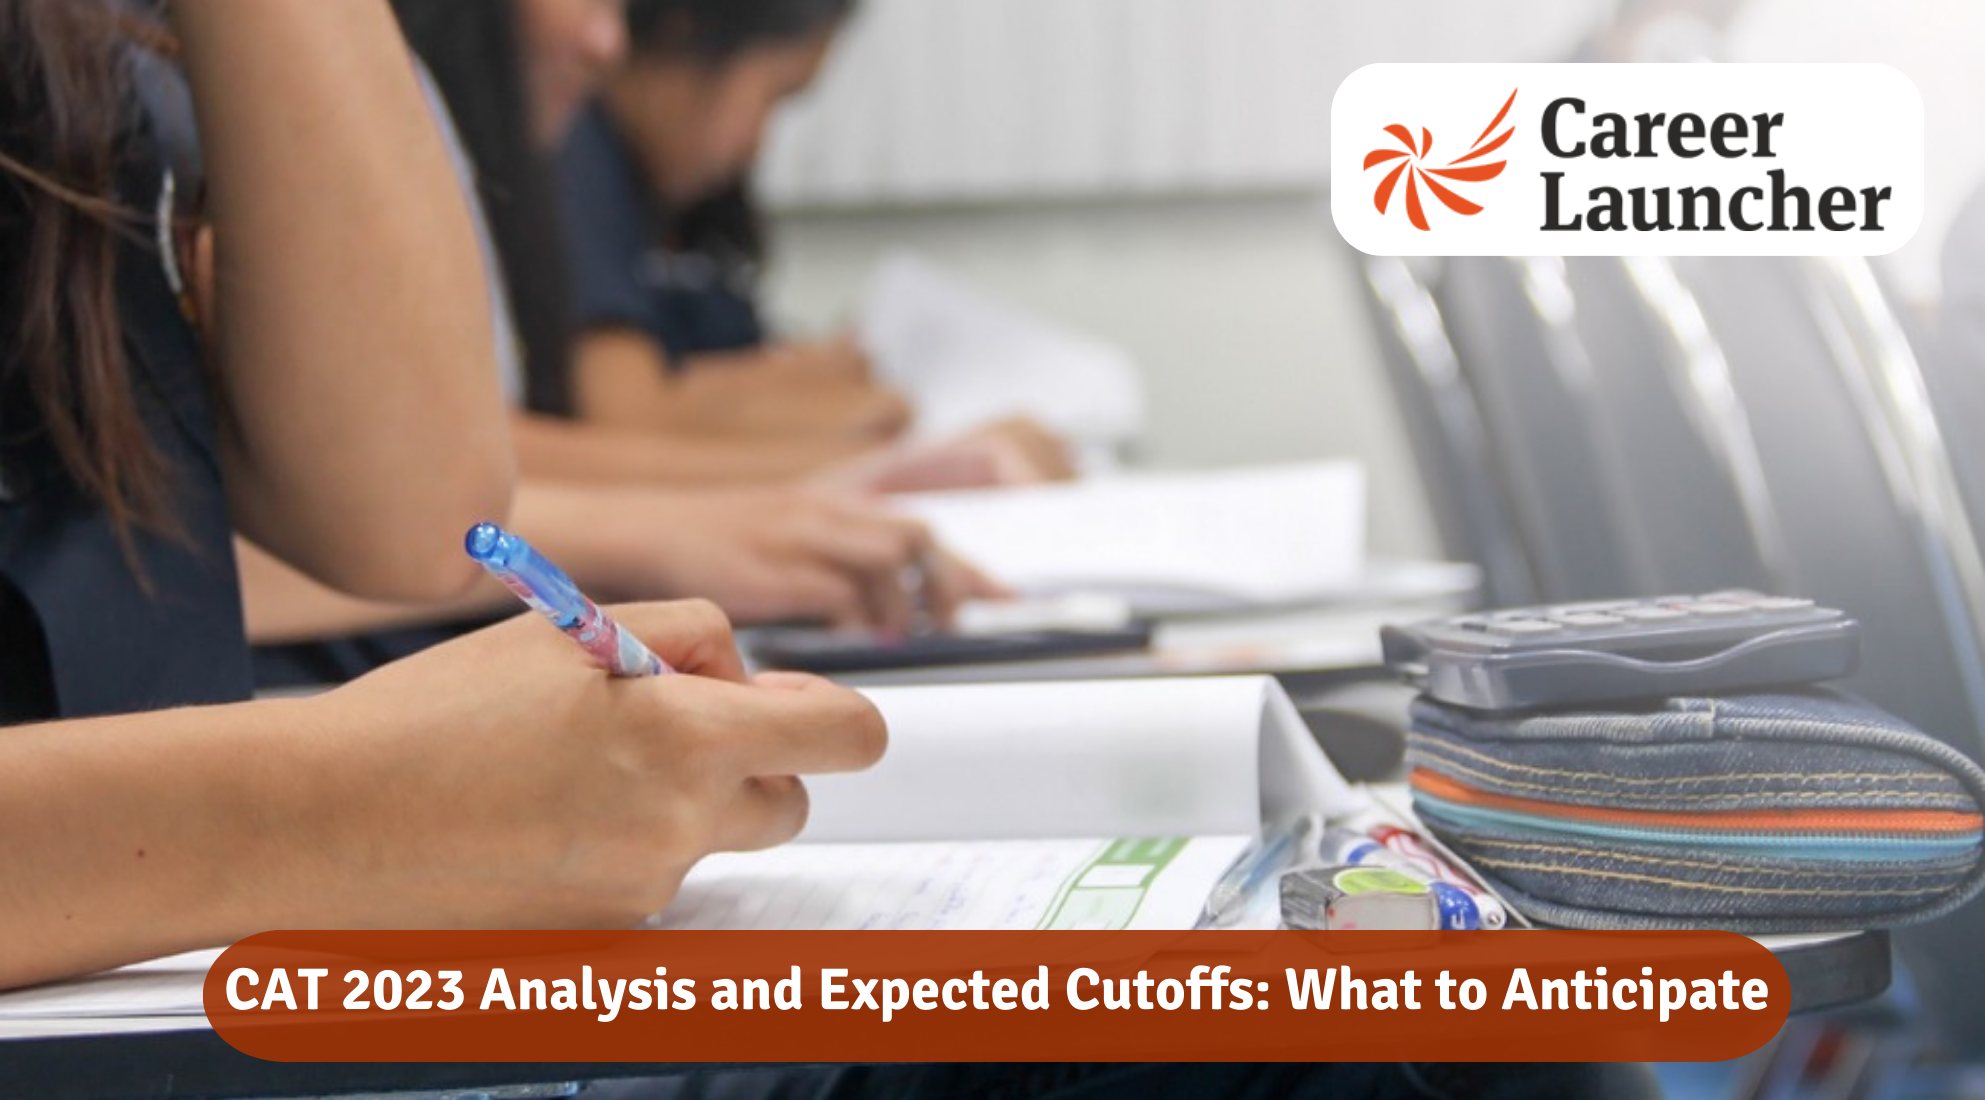 CAT 2023 Analysis and Expected Cutoffs: What to Anticipate